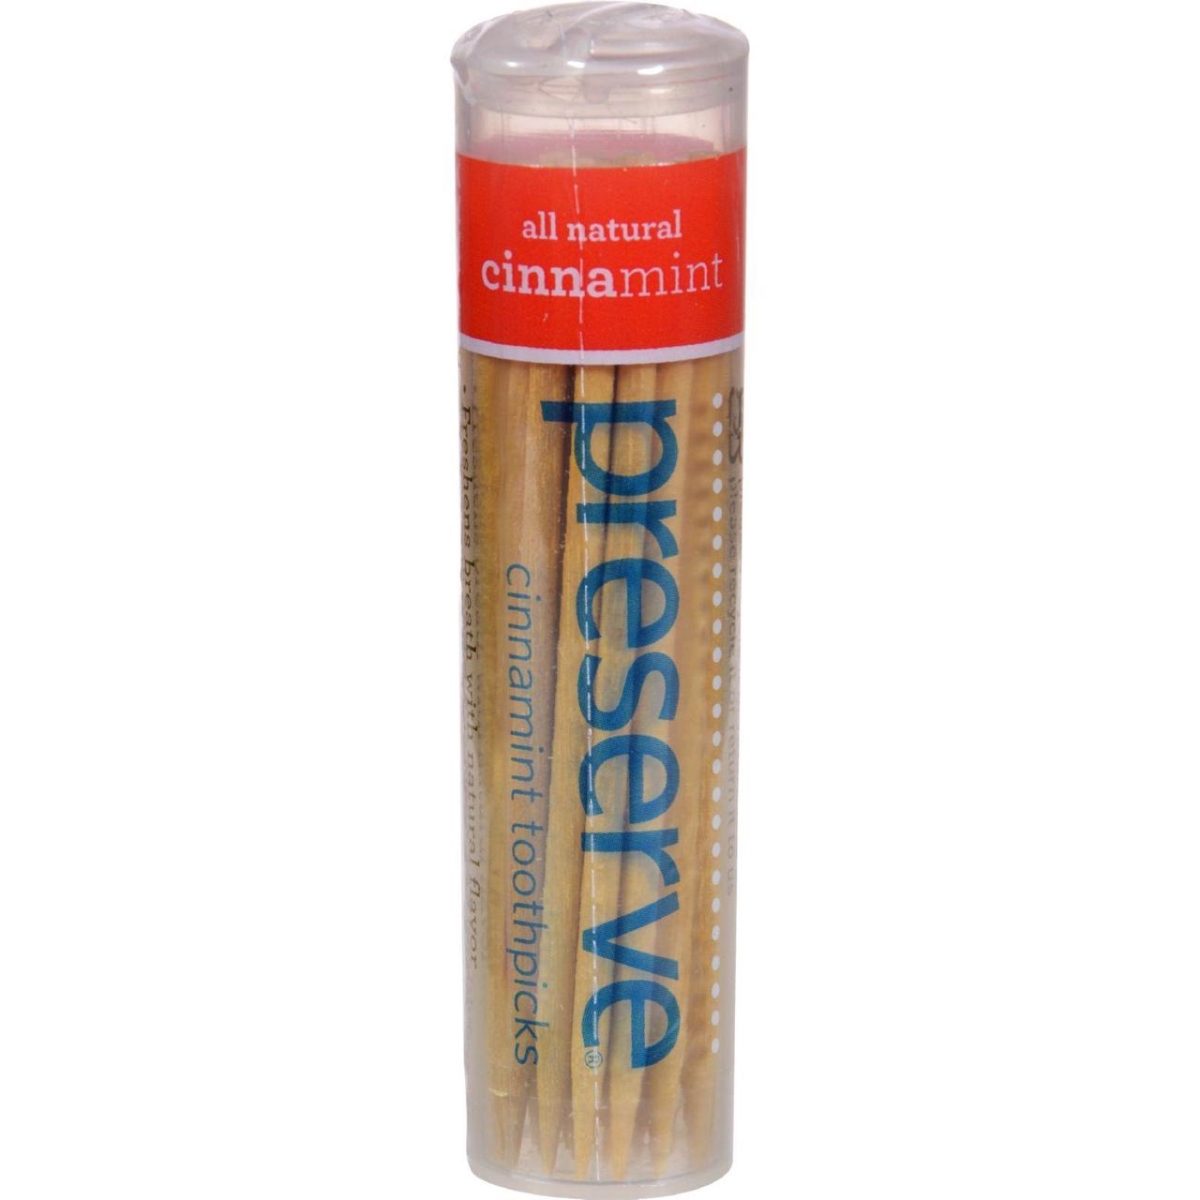 Hg0725572 Cinnamint Flavored Toothpicks - 35 Pieces